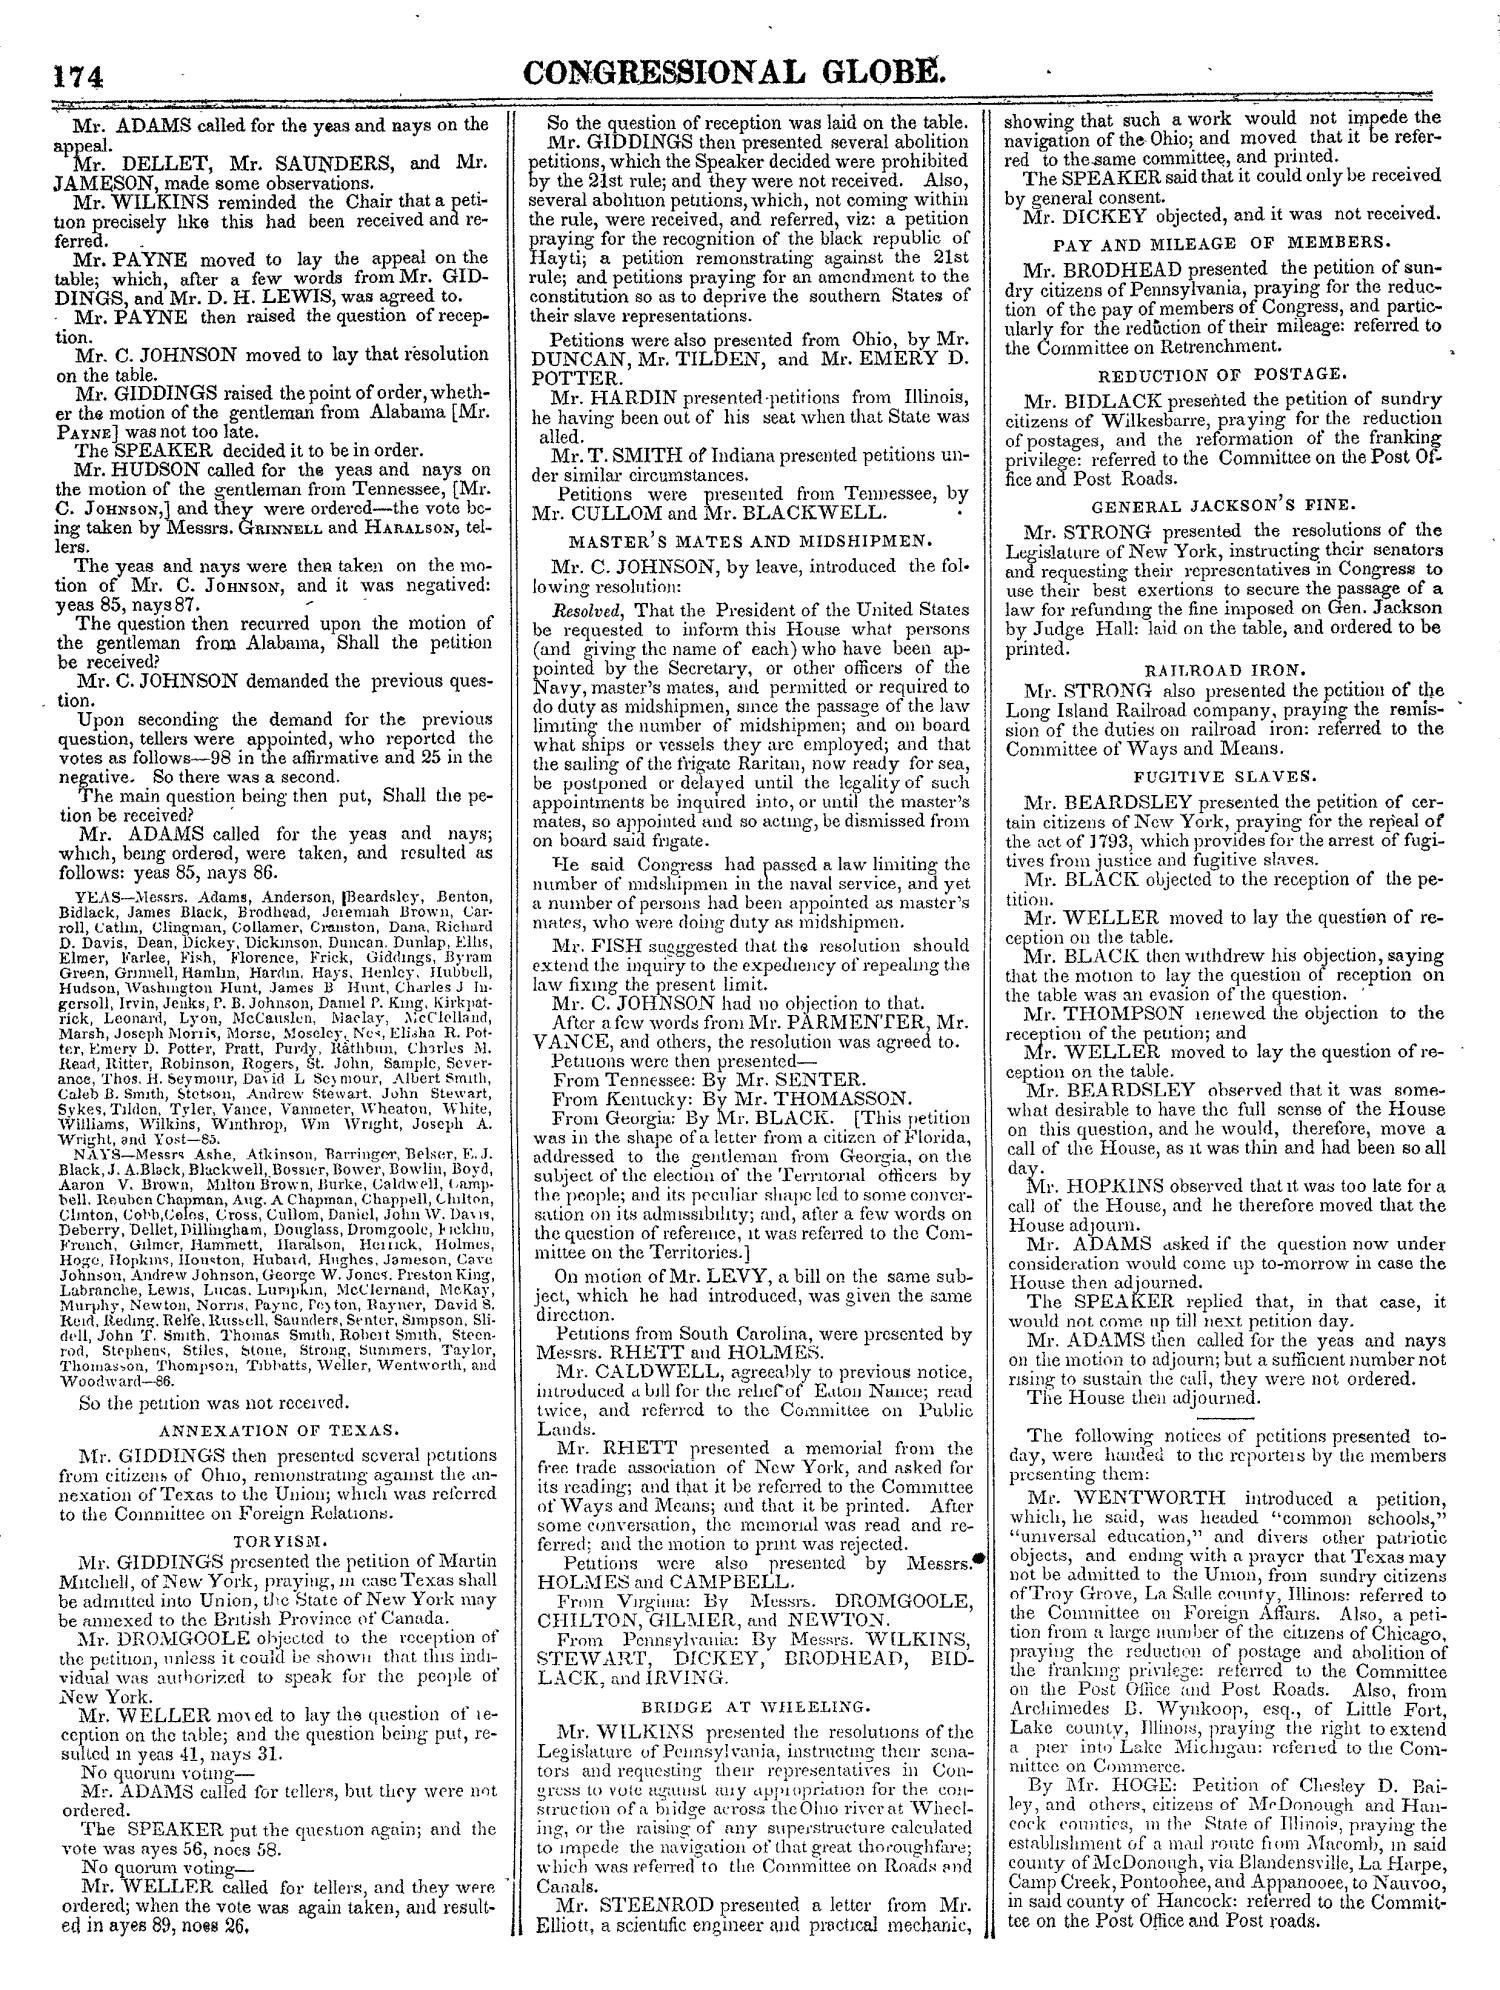 The Congressional Globe, Volume 13, Part 1: Twenty-Eighth Congress, First Session
                                                
                                                    174
                                                